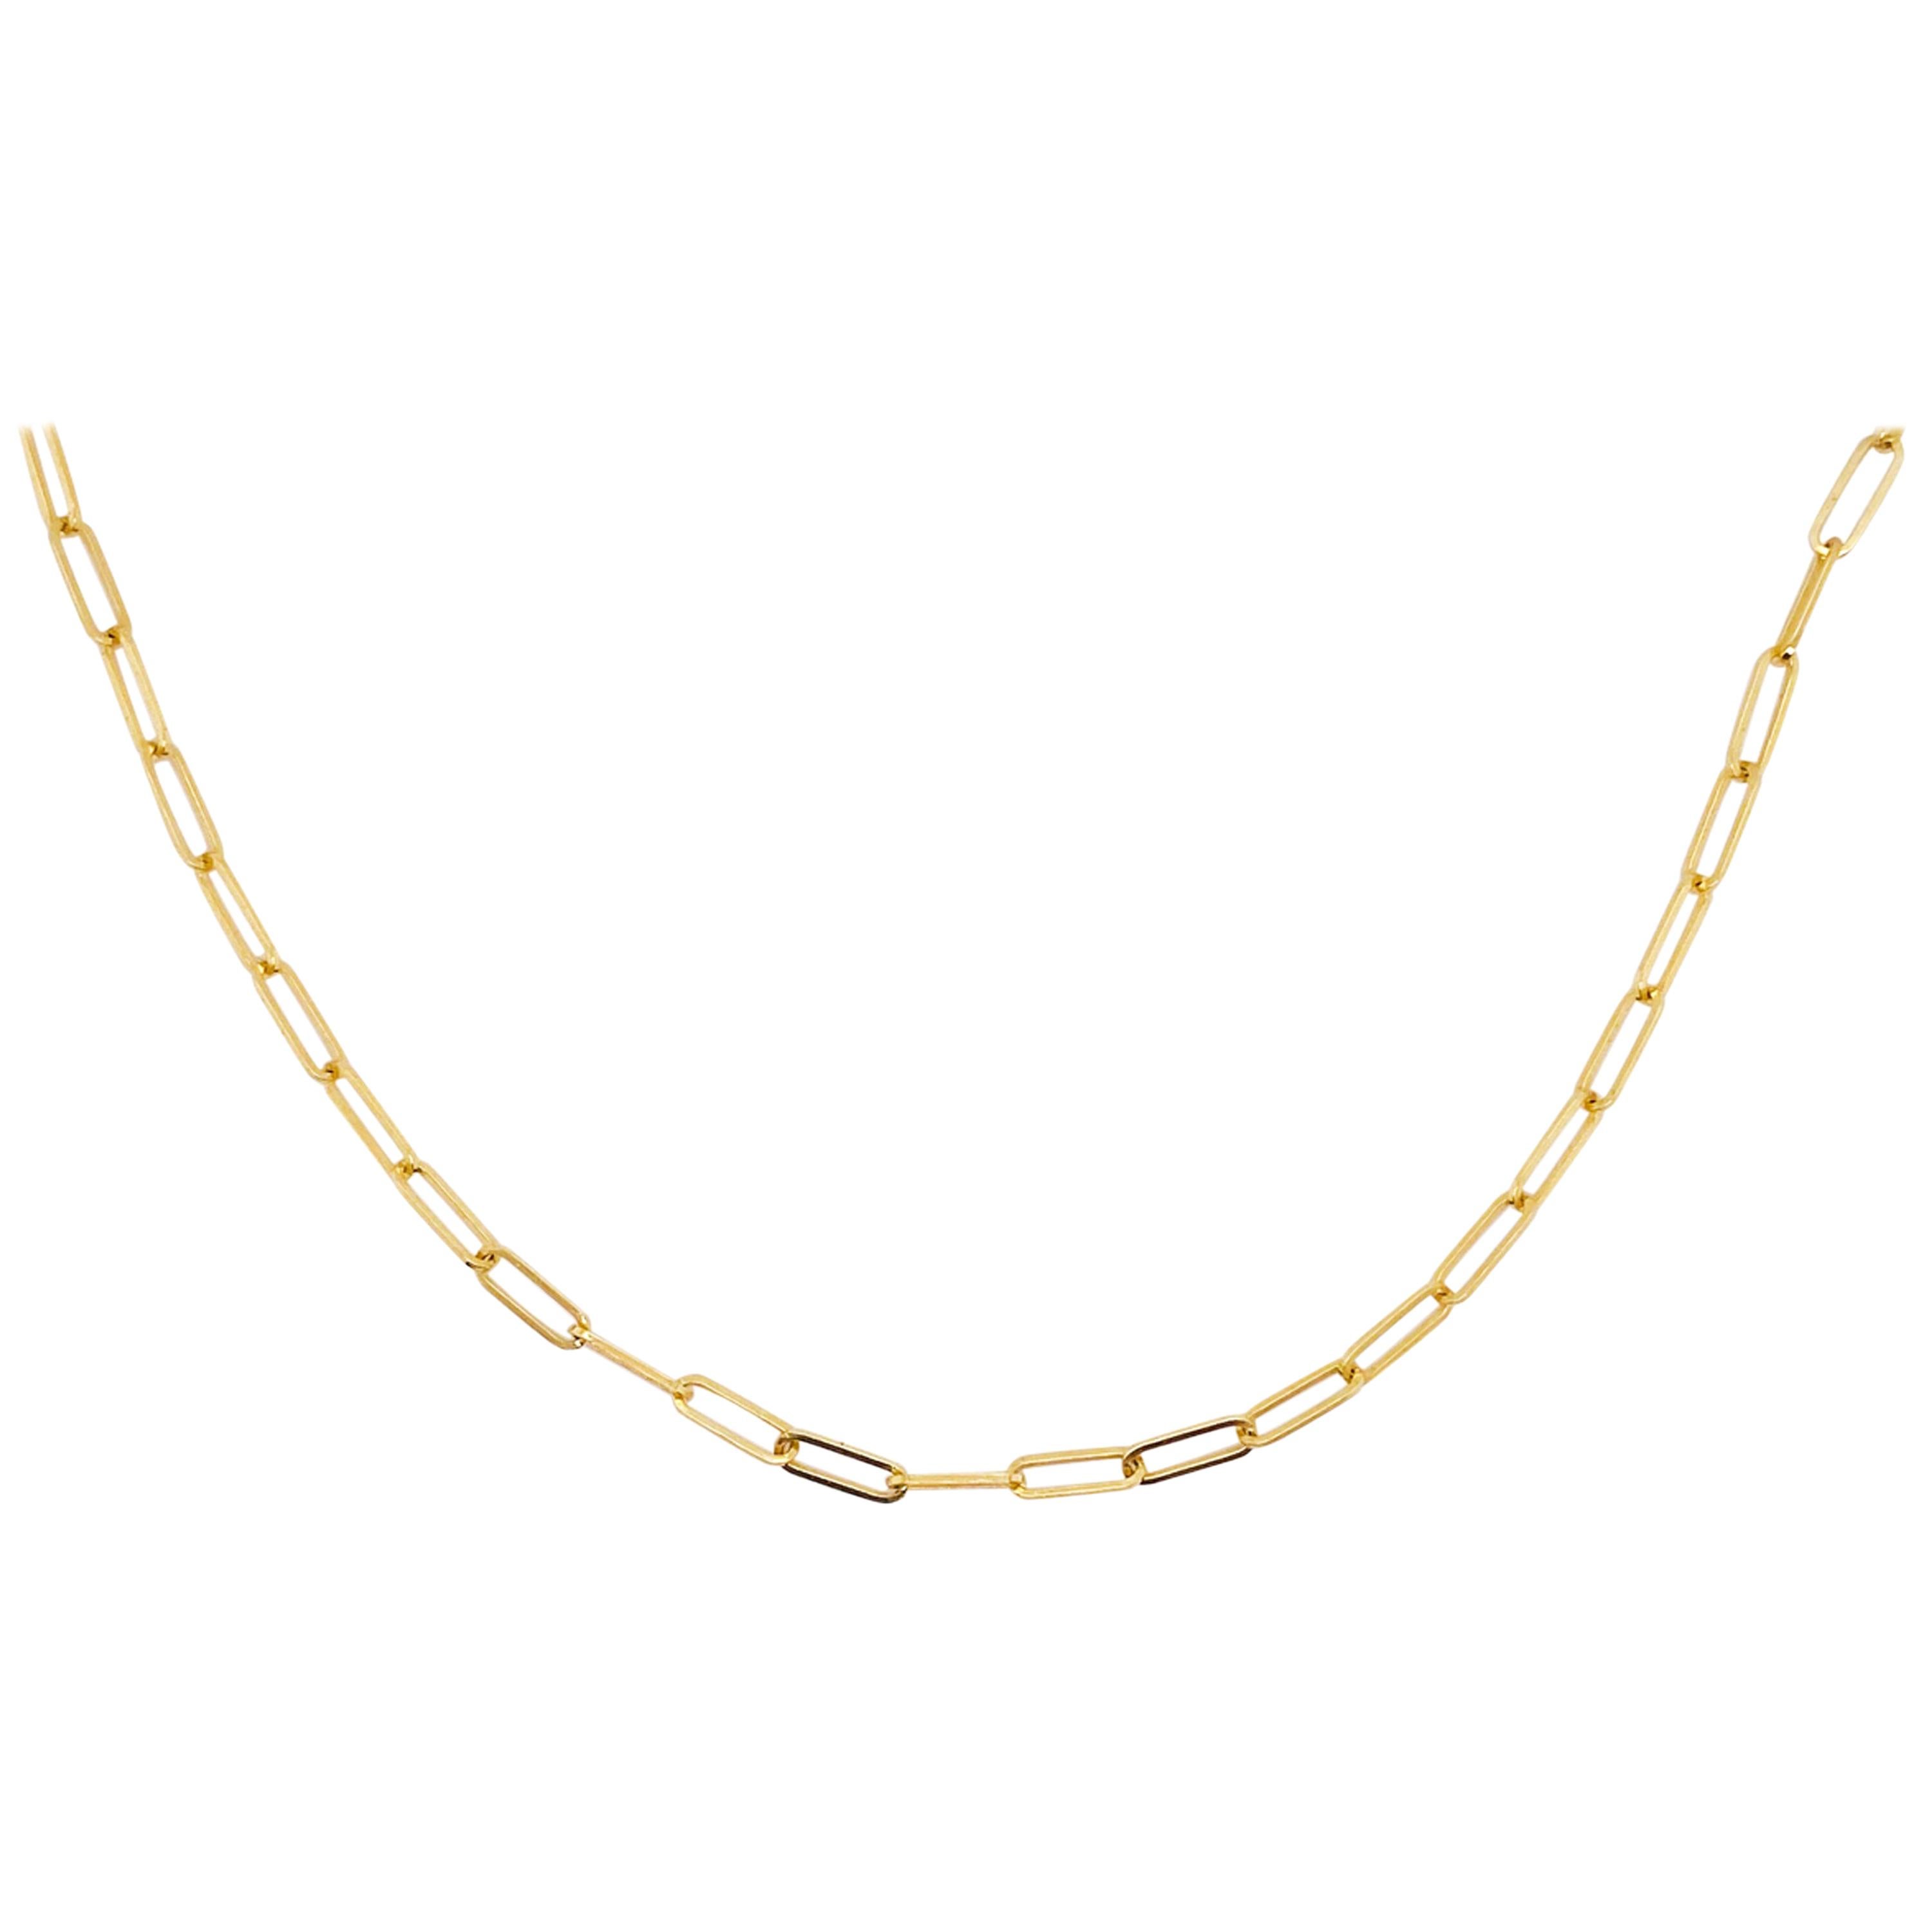 Paper Clip Chain Necklace, 24 inch 2.5mm in 14K Yellow, White, Rose Gold For Sale